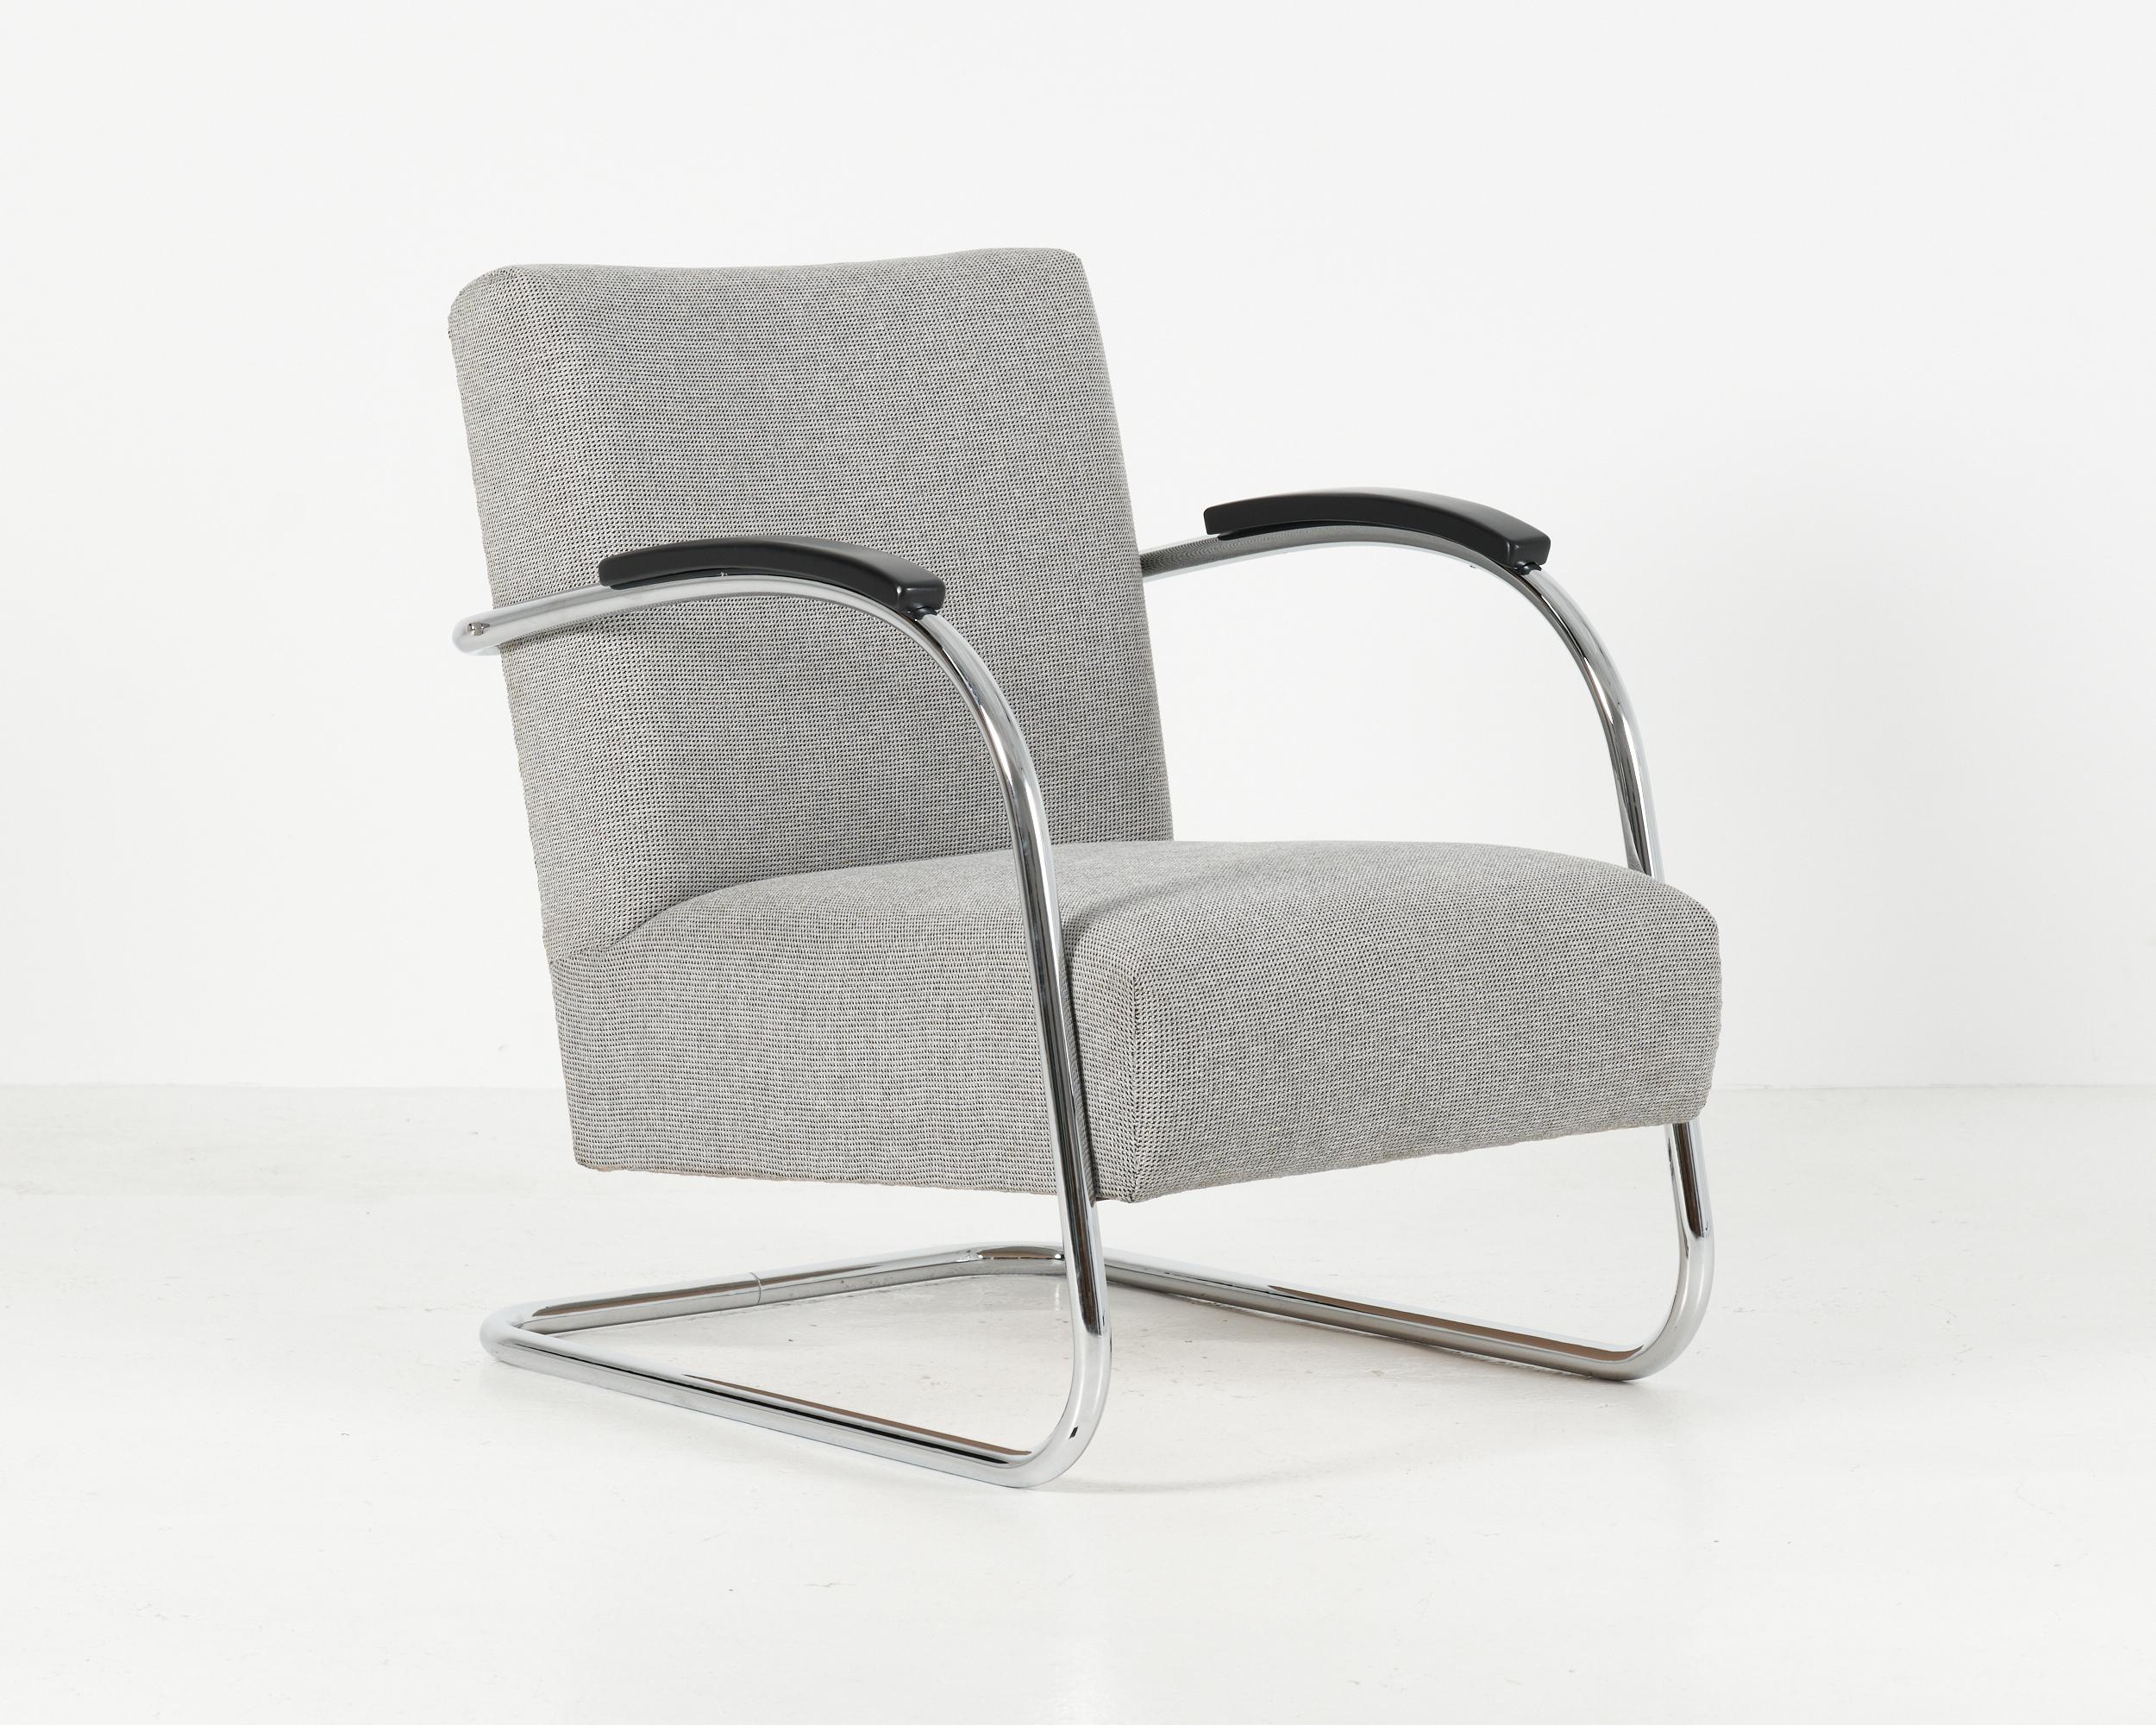 A striking  bauhaus armchair produced by Mücke & Melder, who have set their production processes on the terrain of former Czechoslovakia during the 1930’s.

The chairs have been professionally restored with new seat cushioning and high quality